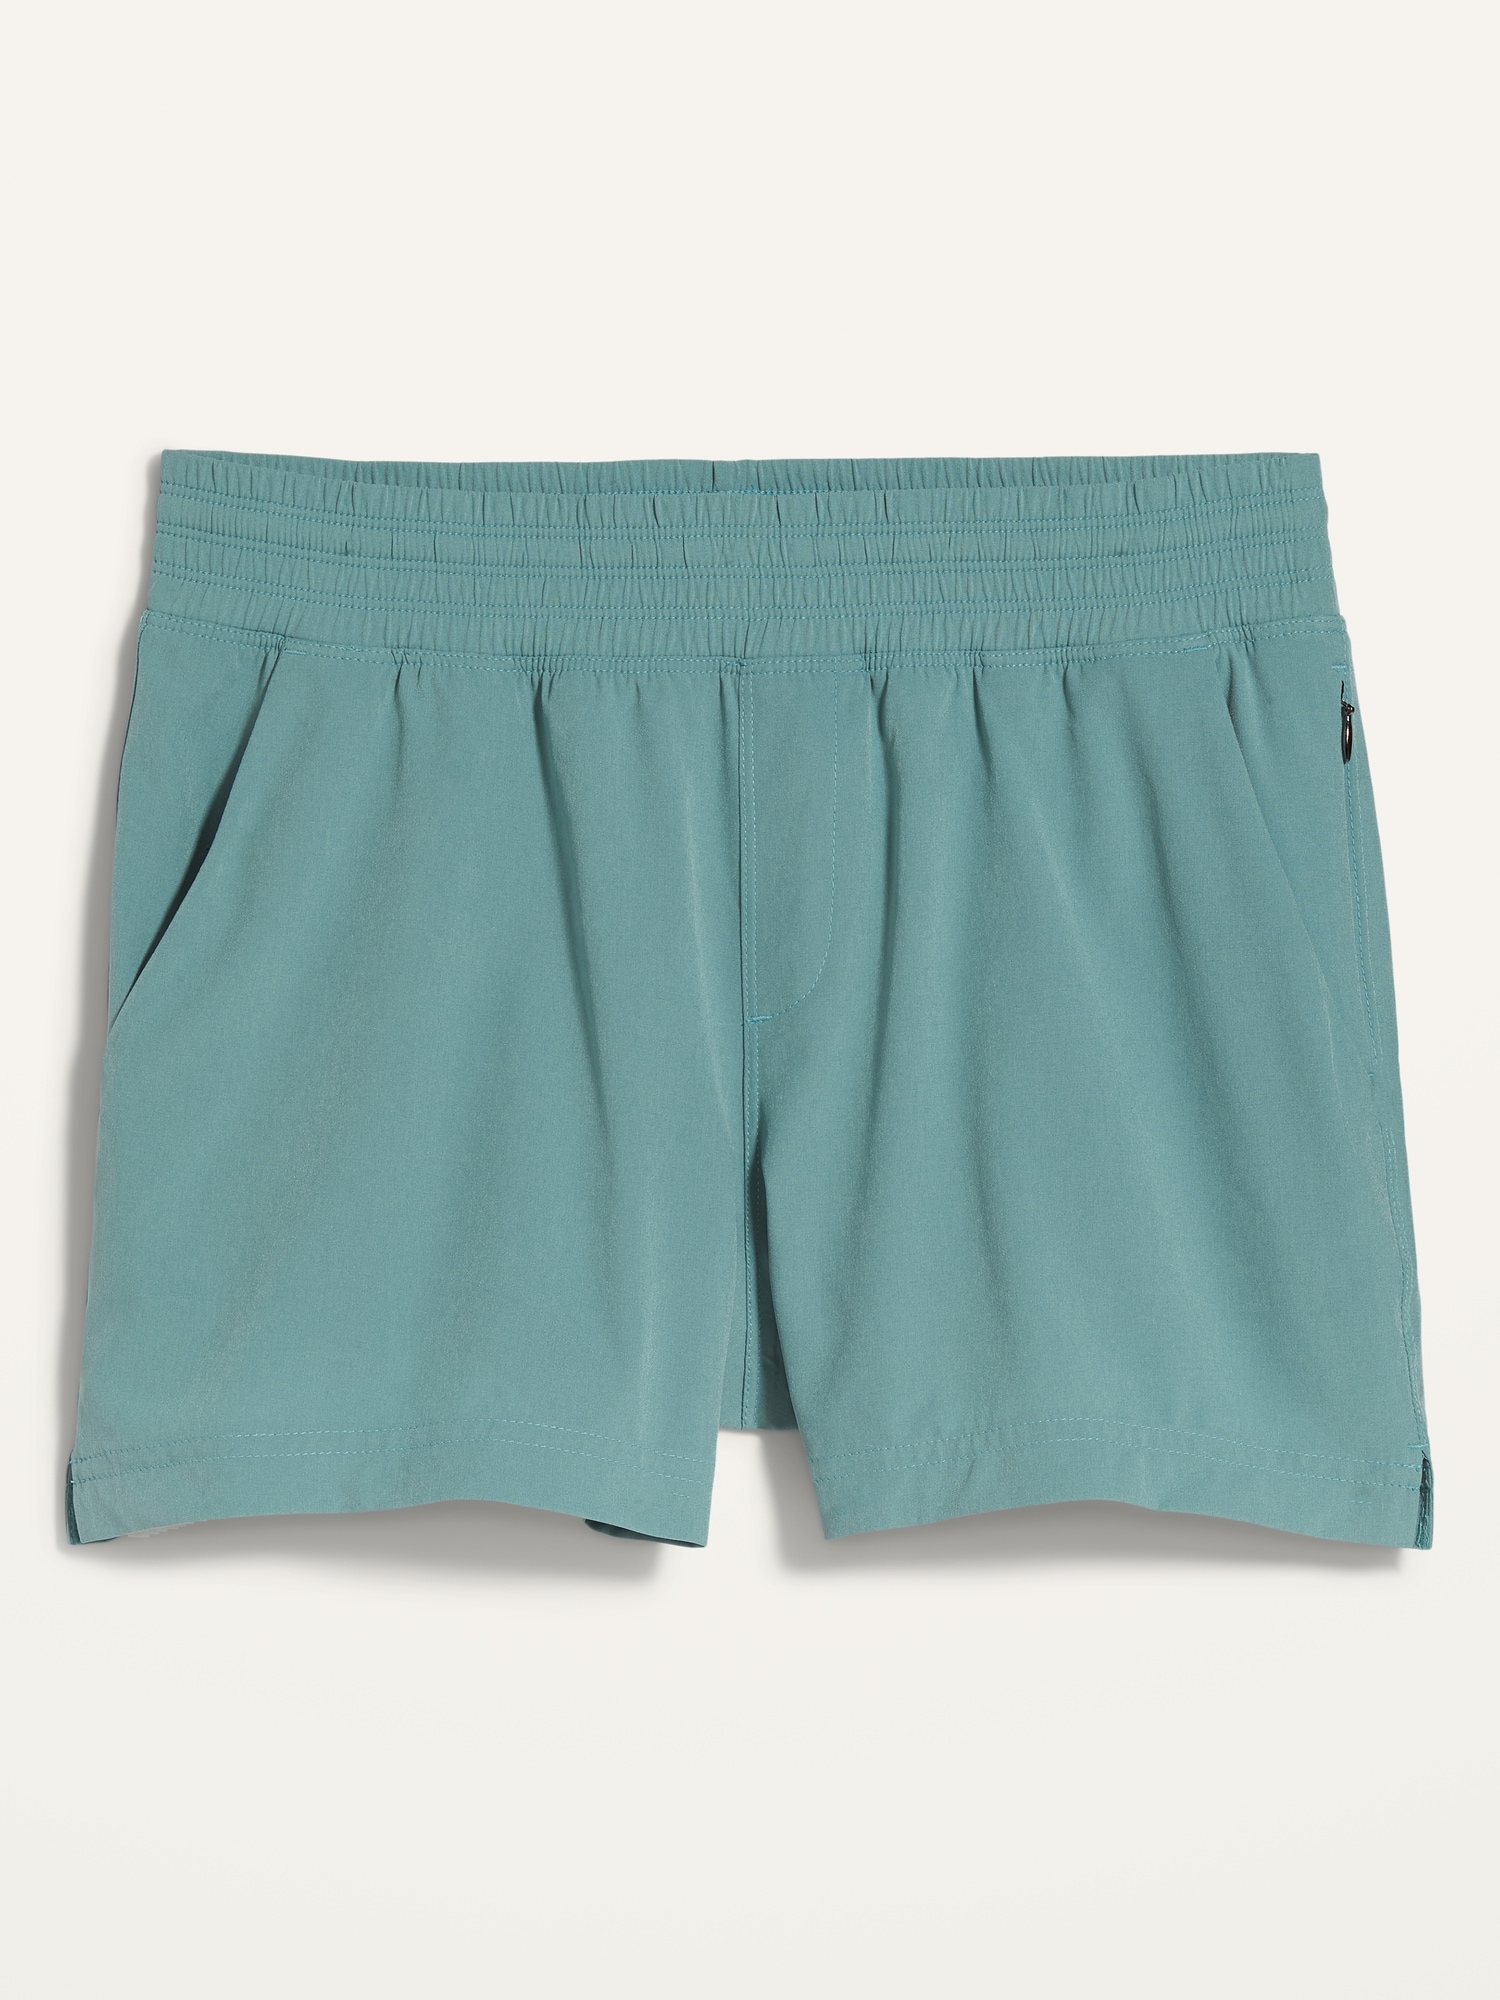 Uniqlo 100% Polyester Athletic Shorts for Women